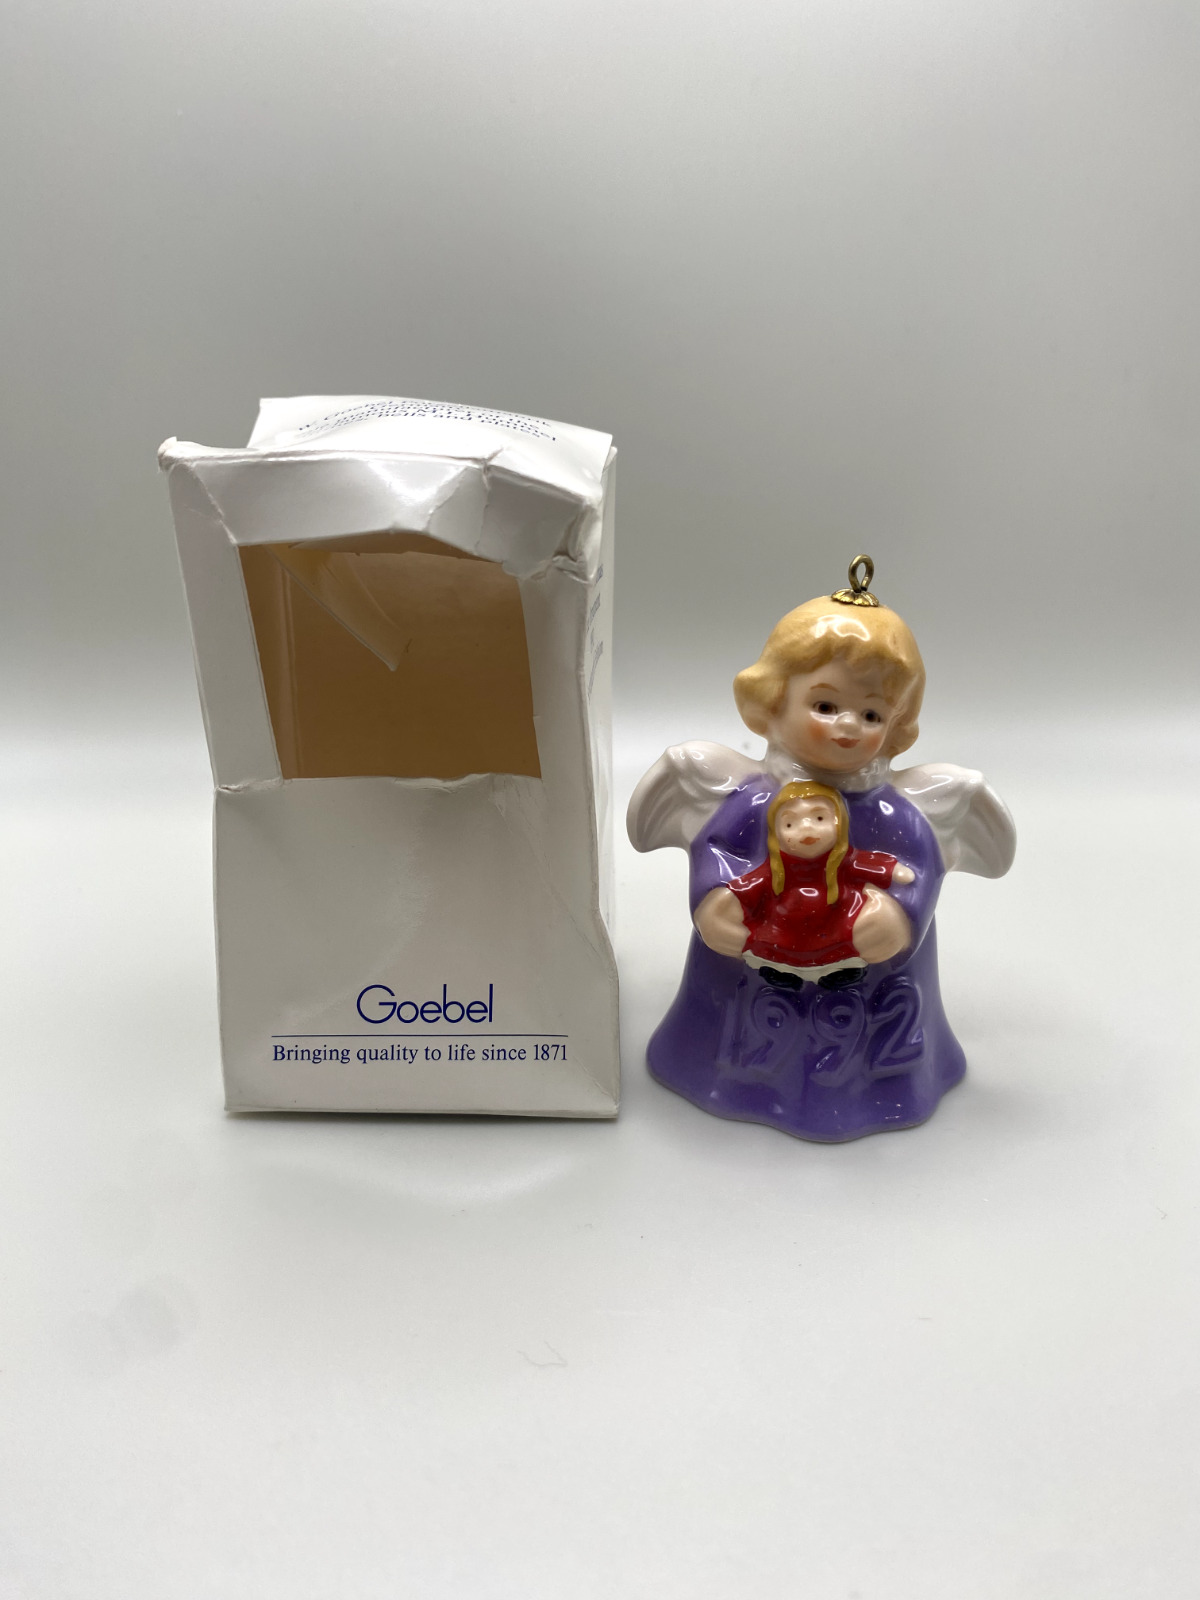 1992 Goebel Annual Angel Bell Christmas Tree Ornament - Purple Gown & Doll